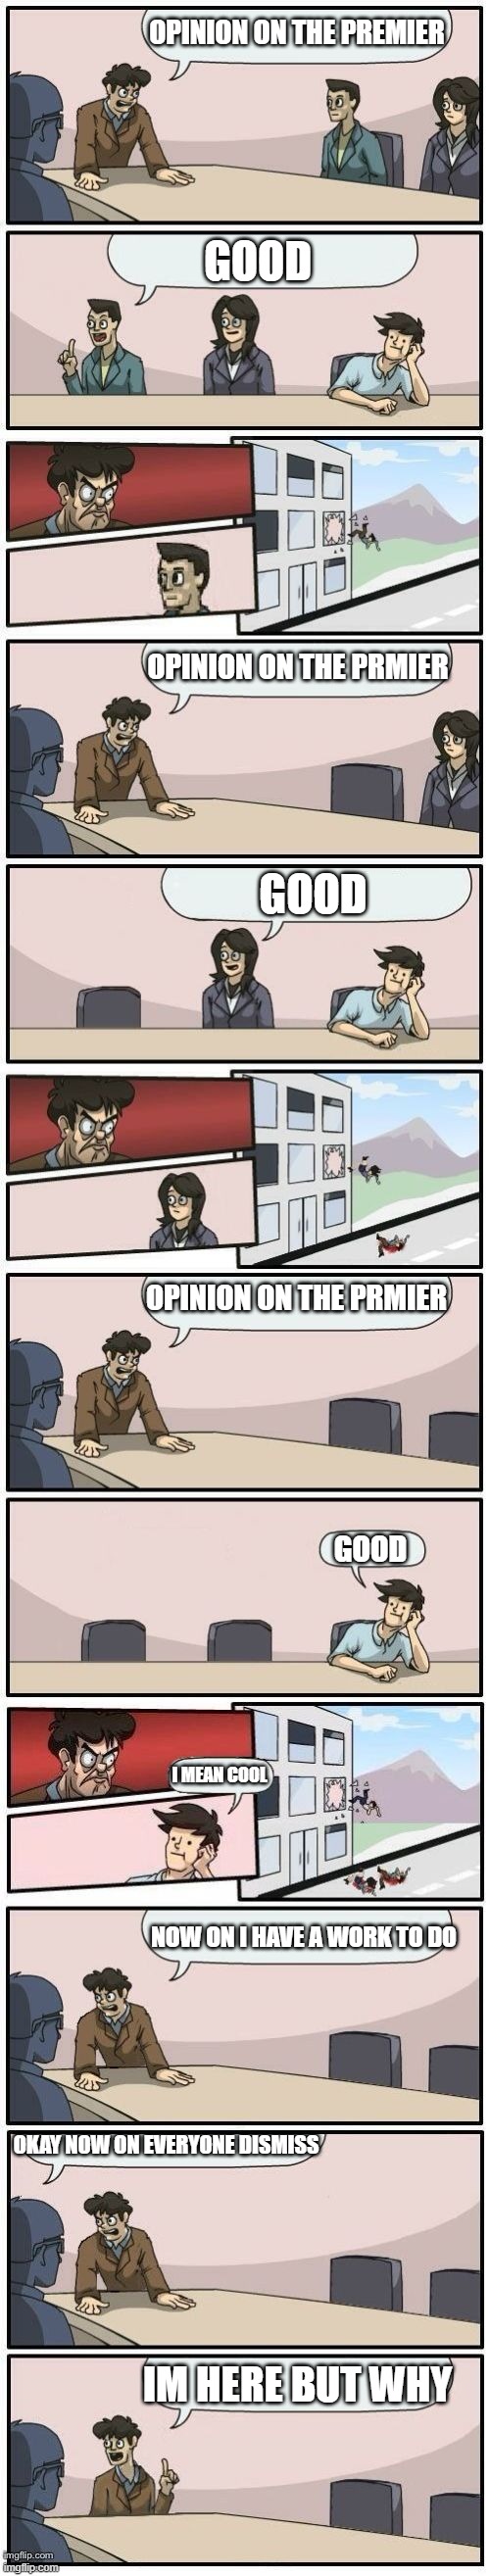 OPINION ON THE PRMIER? FULL EJECTION | OPINION ON THE PREMIER; GOOD; OPINION ON THE PRMIER; GOOD; OPINION ON THE PRMIER; GOOD; I MEAN COOL; NOW ON I HAVE A WORK TO DO; OKAY NOW ON EVERYONE DISMISS; IM HERE BUT WHY | image tagged in boardroom meeting suggestions extended,soviet union | made w/ Imgflip meme maker